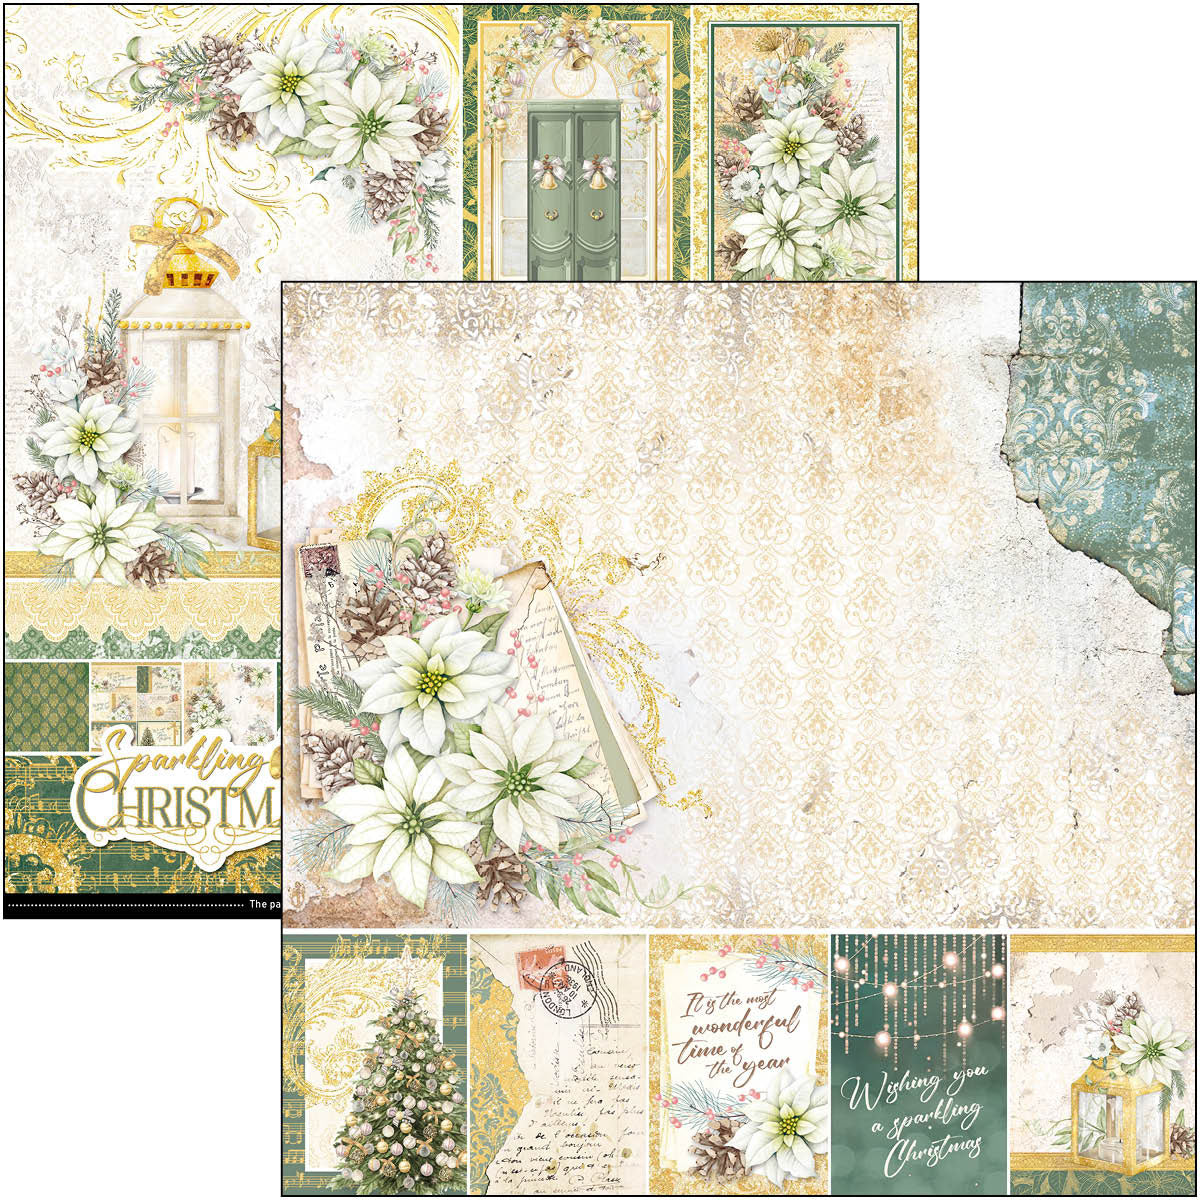 Ciao Bella Time for Home 12x12 Scrapbook Paper Pad for Decoupage